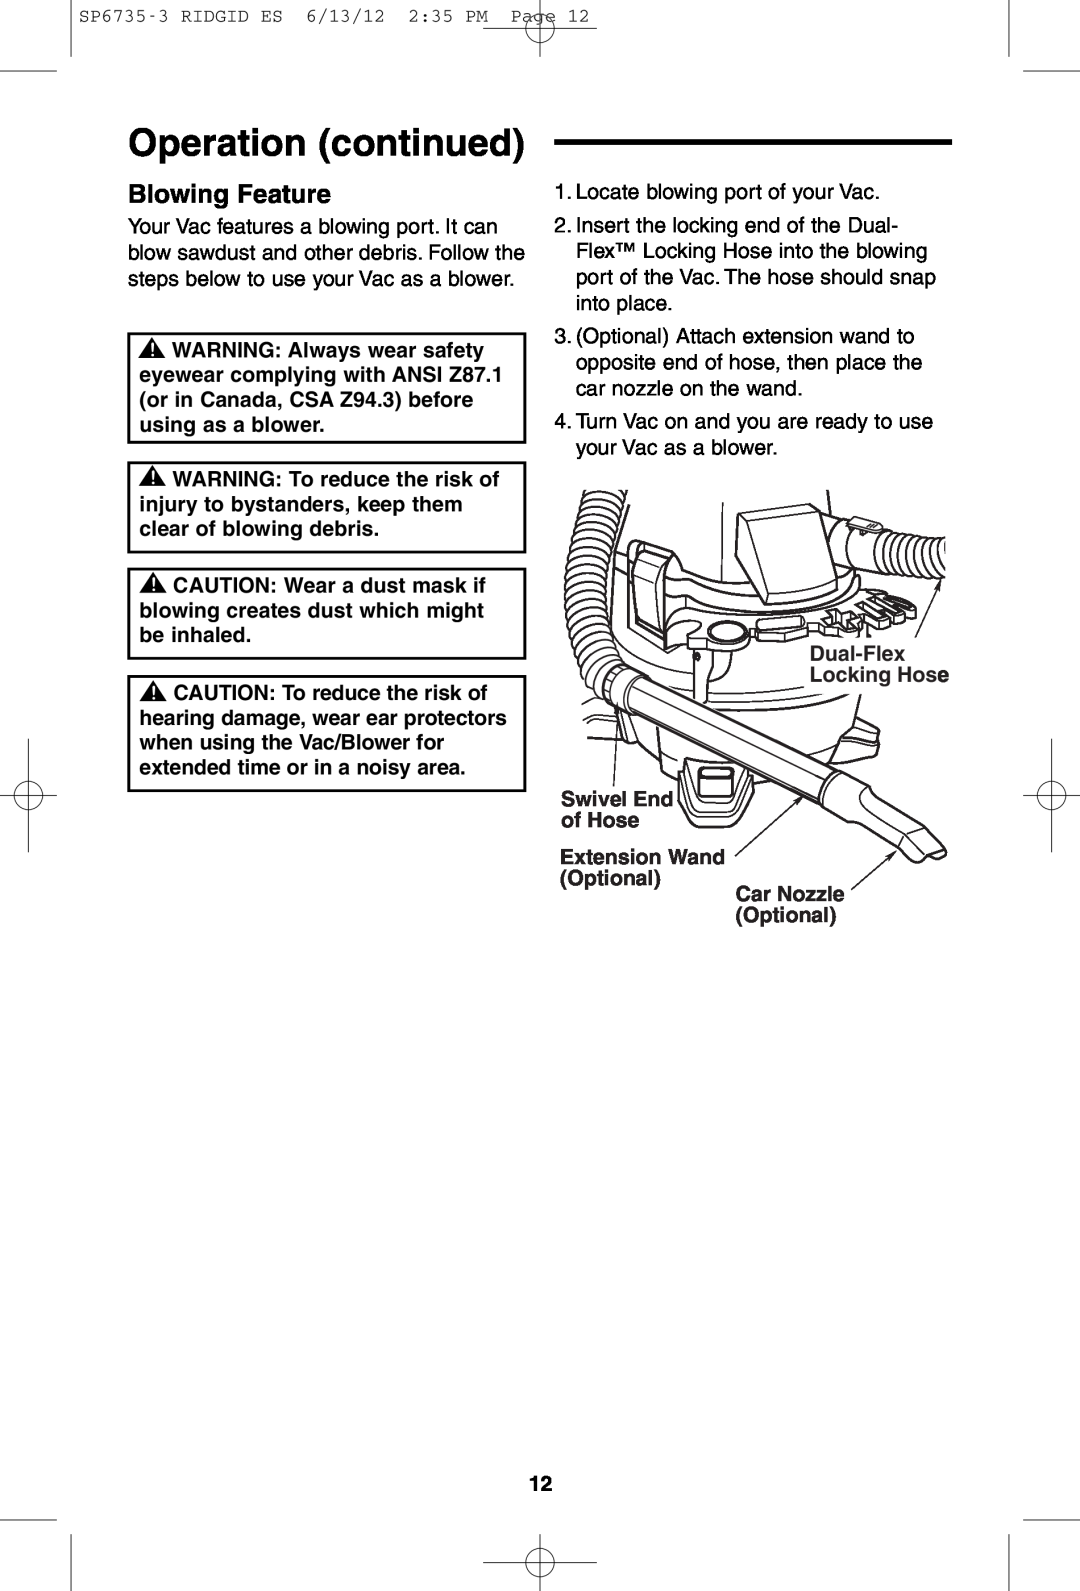 RIDGID WD14500 owner manual Blowing Feature, Operation continued 